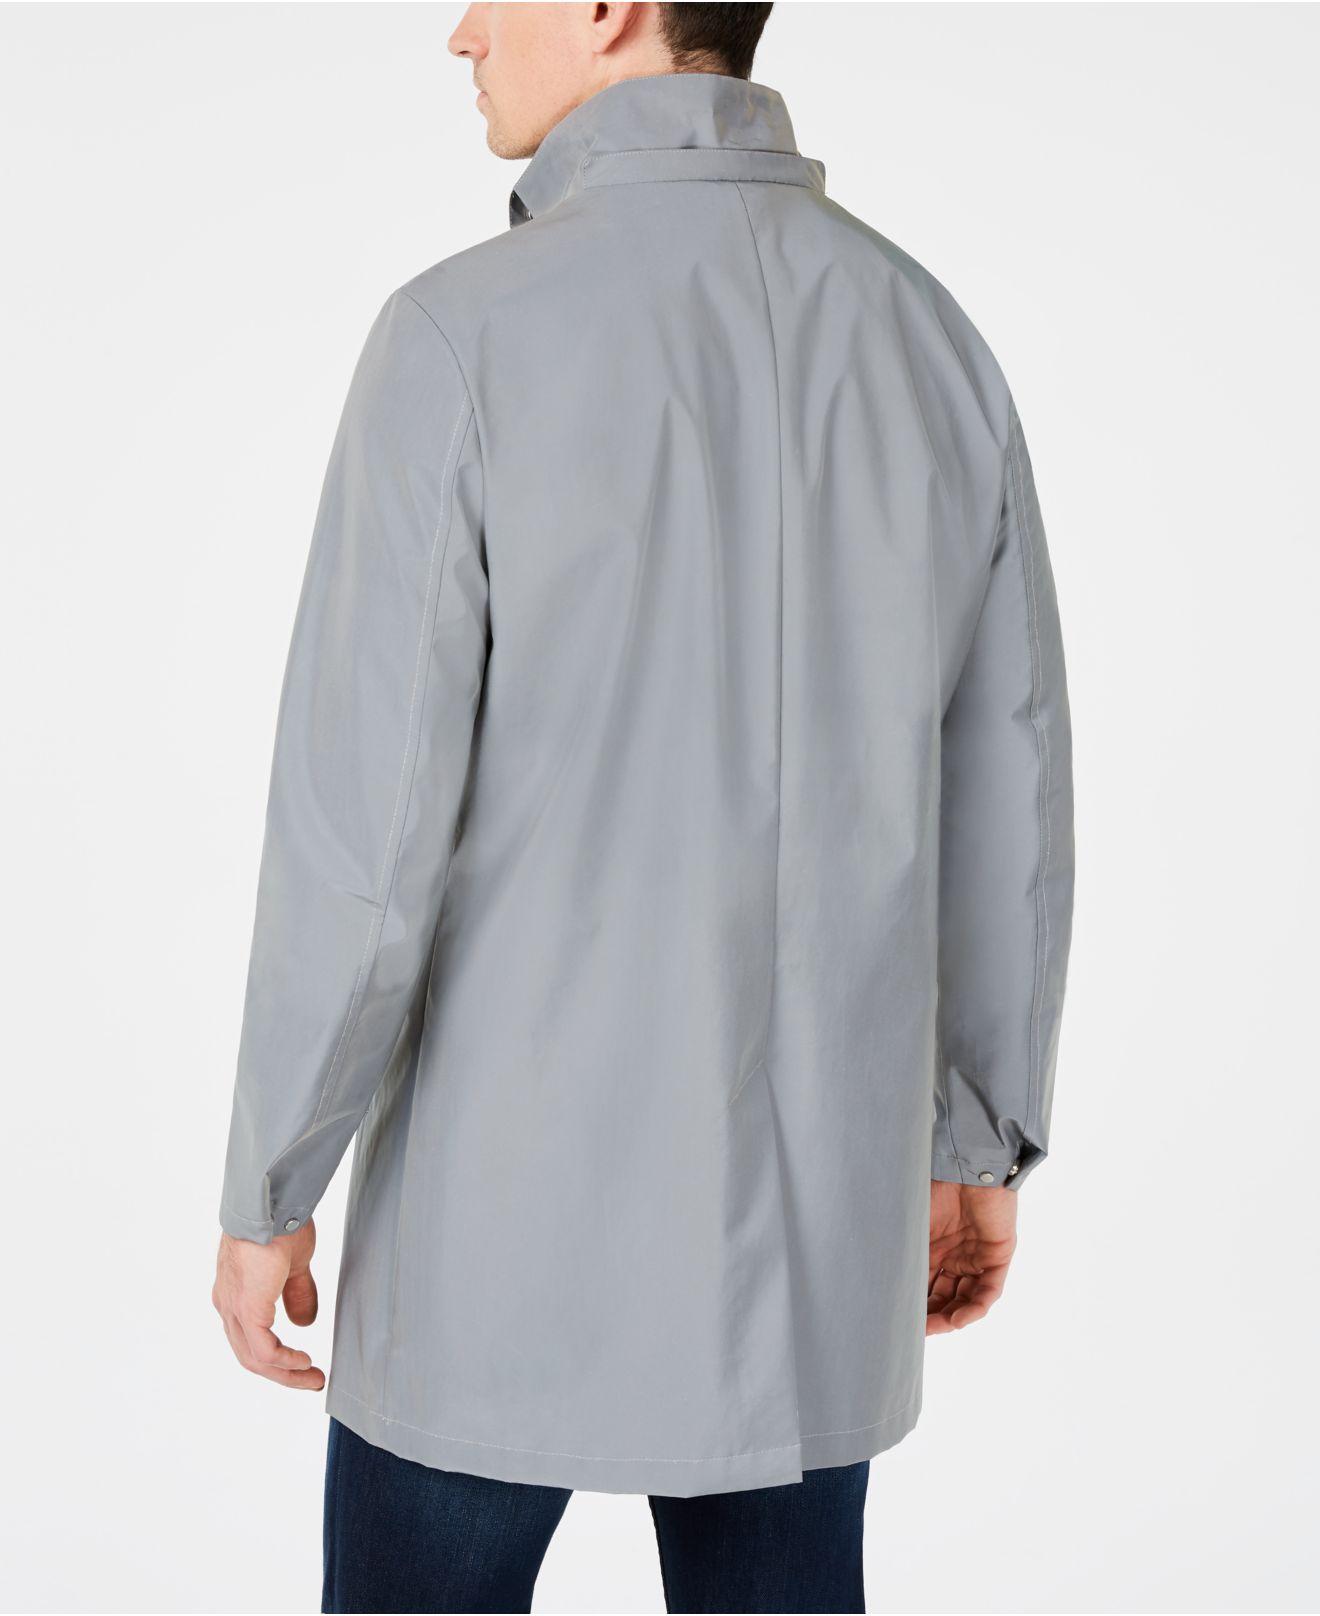 Calvin Klein Synthetic Slim-fit Reflective Raincoat in Silver (Metallic)  for Men - Lyst